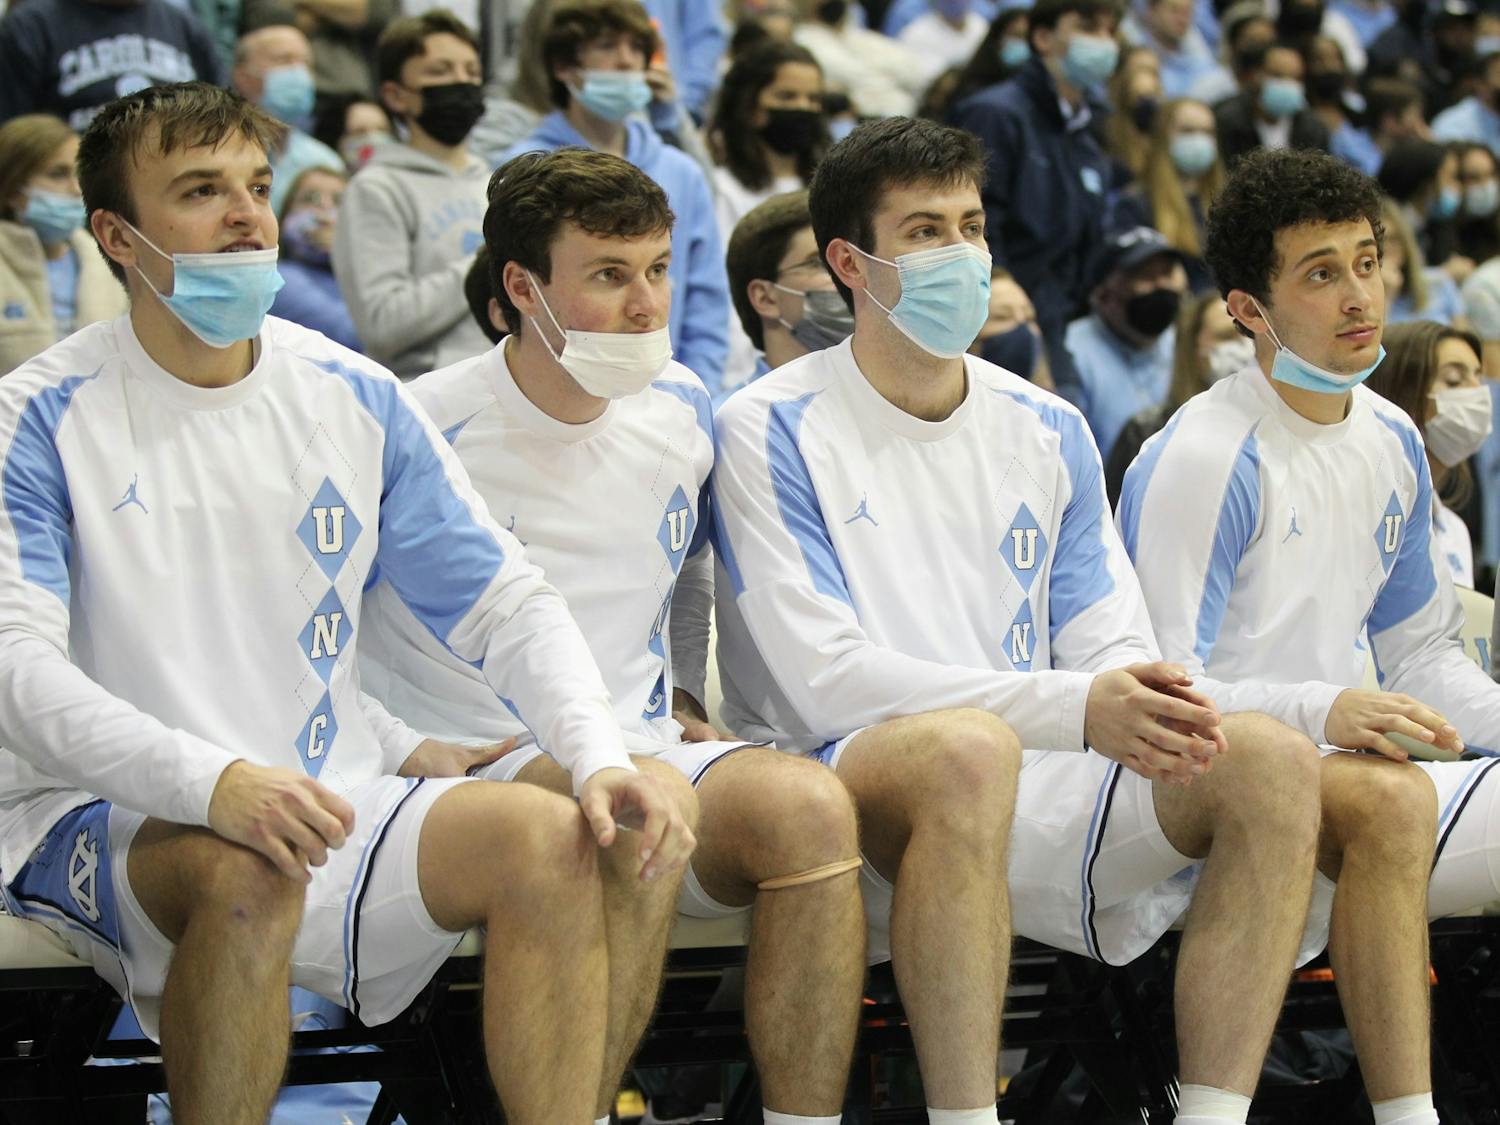 Junior guard Jackson Watkins, sophomore guard Rob Landry, junior forward Duwe Farris and sophomore guard Creighton Lebo watch UNC basketball's home game against Virginia Tech on Monday, Jan. 24, 2022, at the Dean Smith Center. UNC won 78-68.